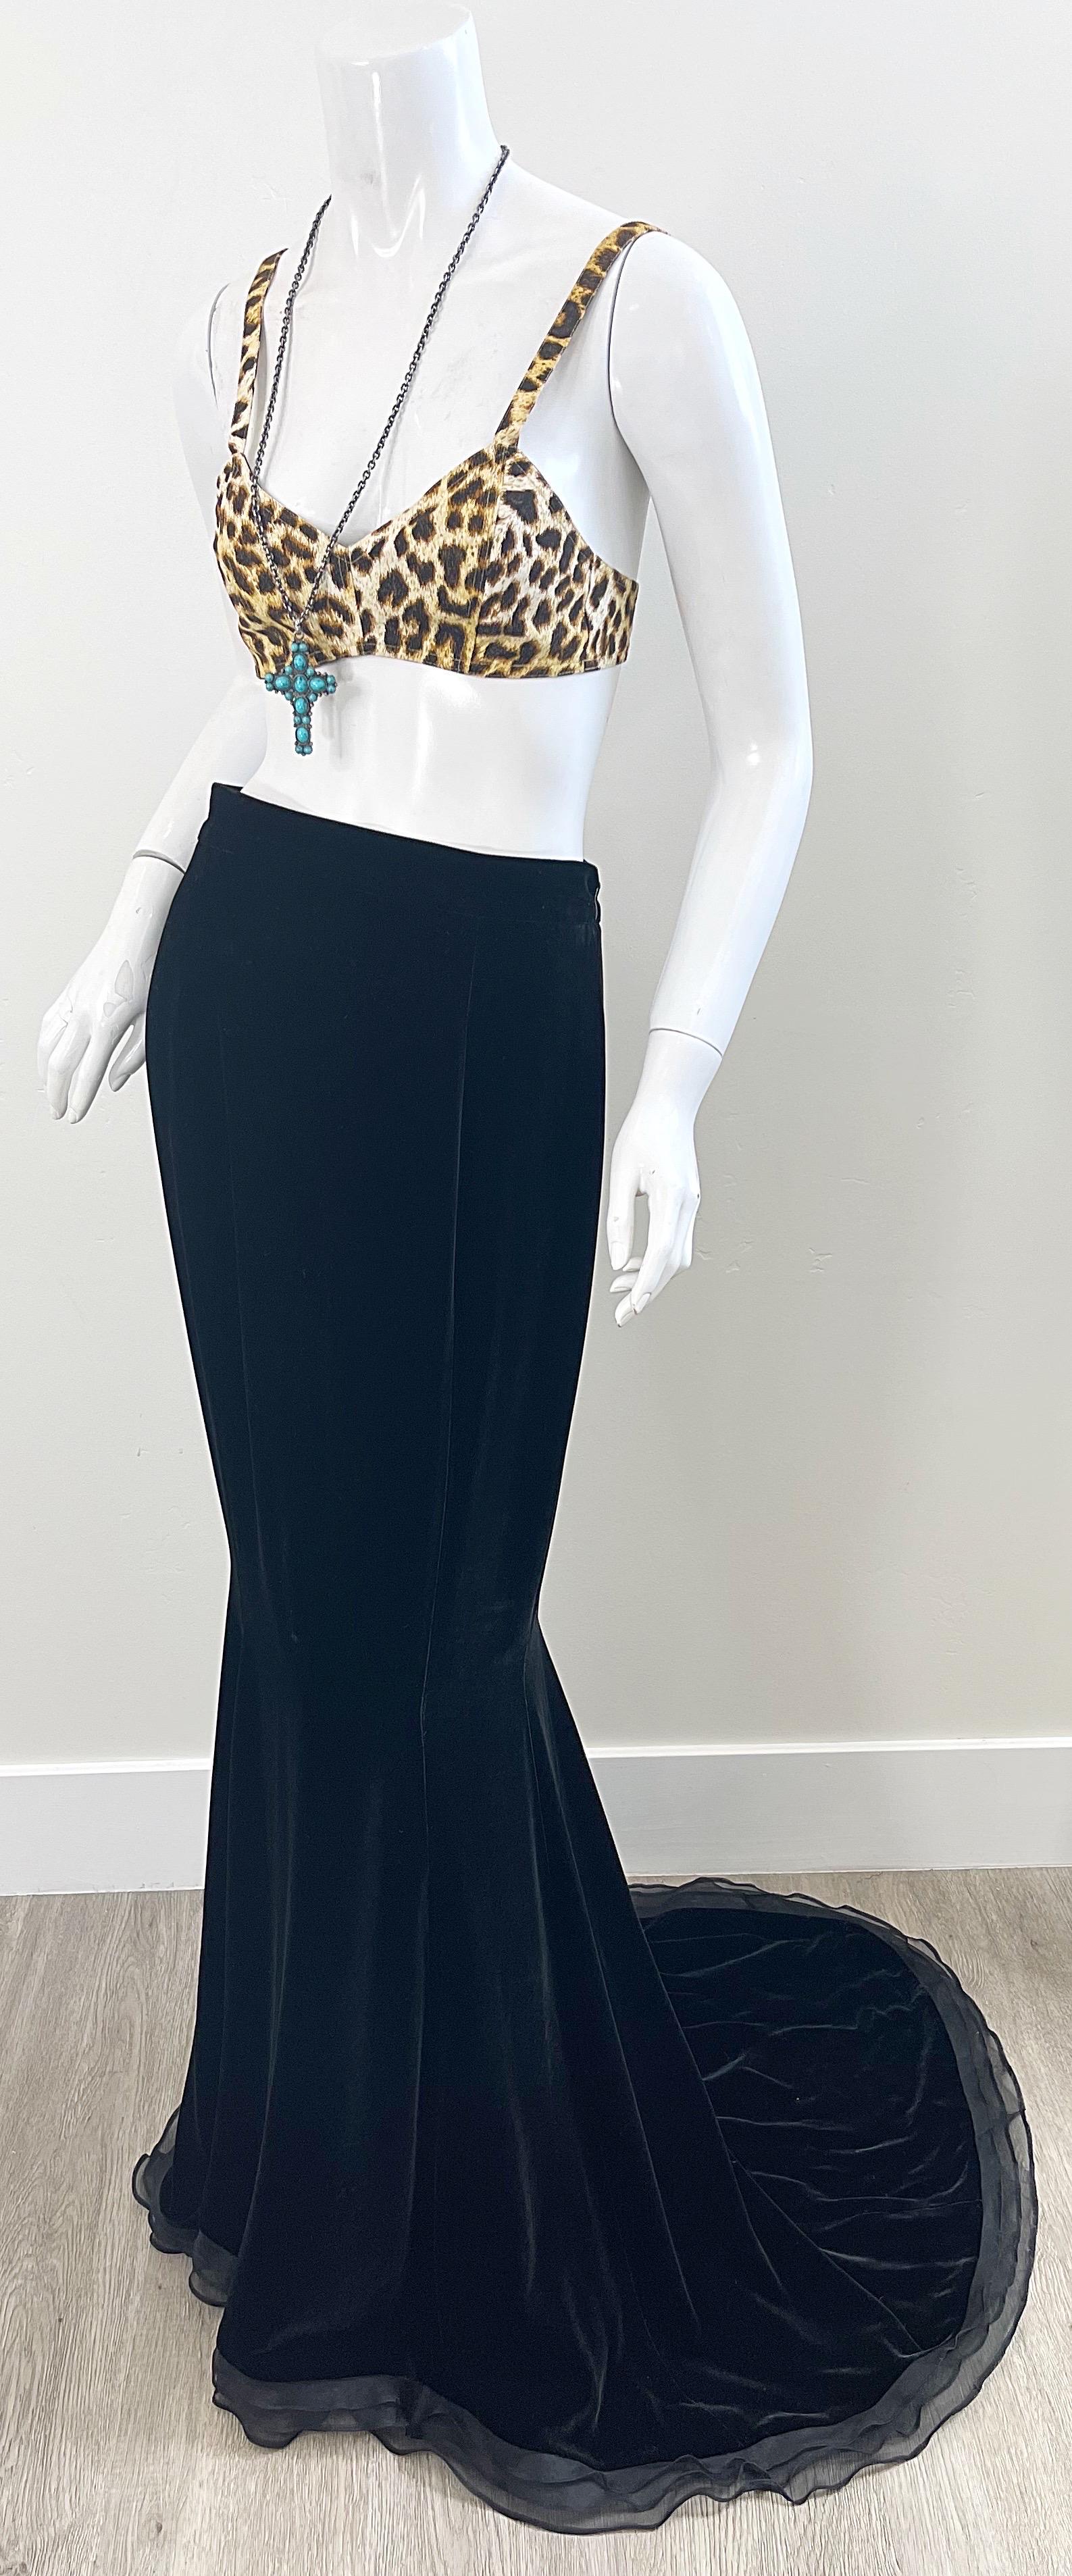 NWT 2000s Zang Toi Size 4 / 6 Black Silk Velvet Chiffon Maxi Skirt w/ Train  In New Condition For Sale In San Diego, CA